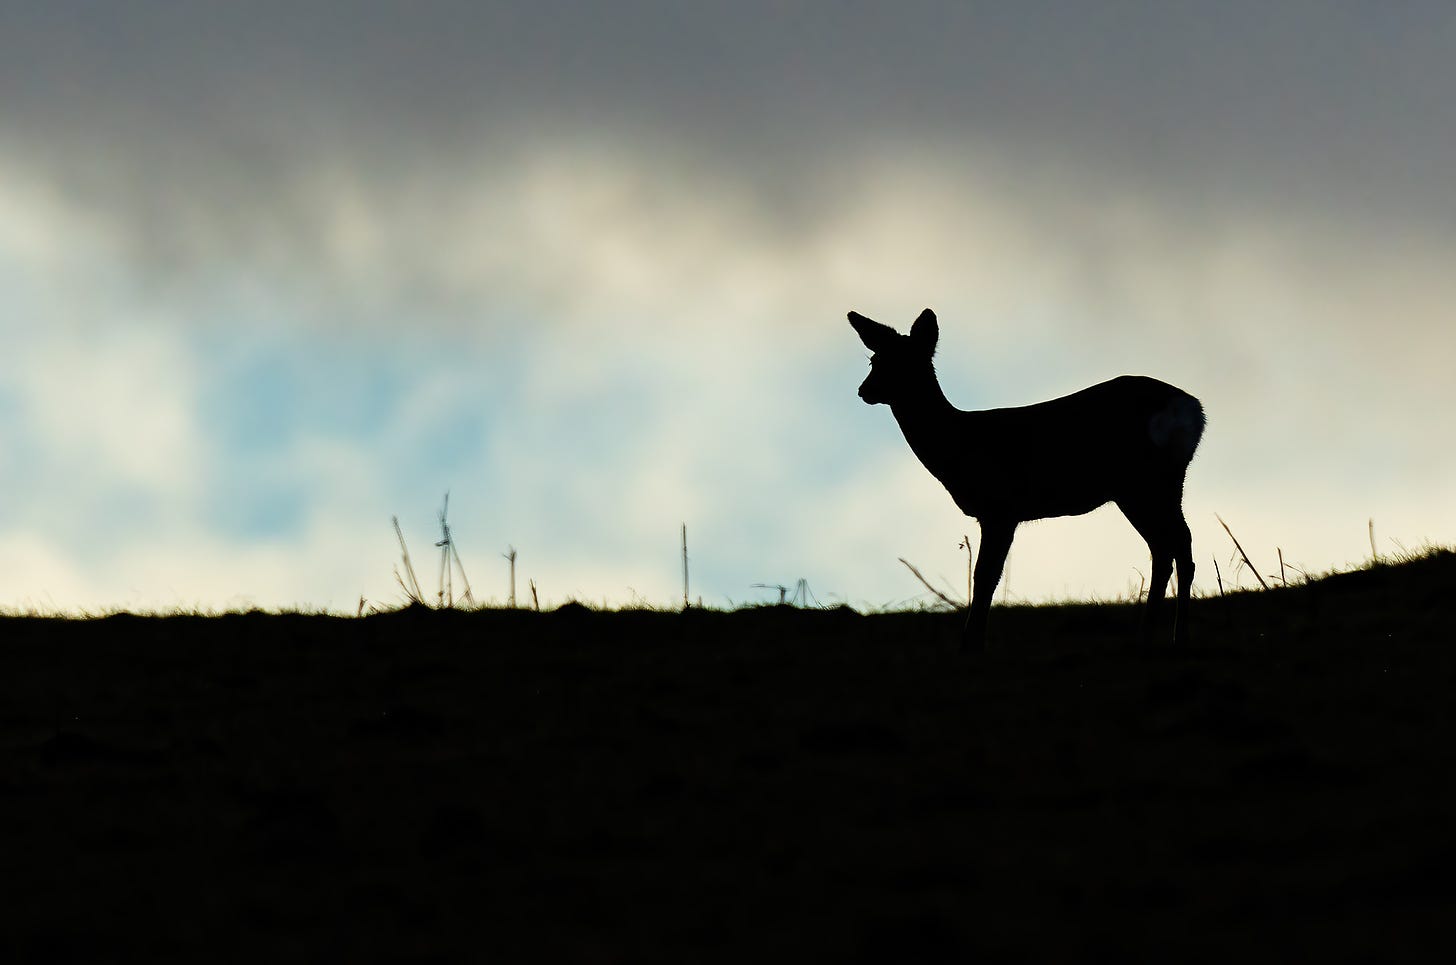 Photo of a roe deer silhouetted against a blue sky with grey clouds